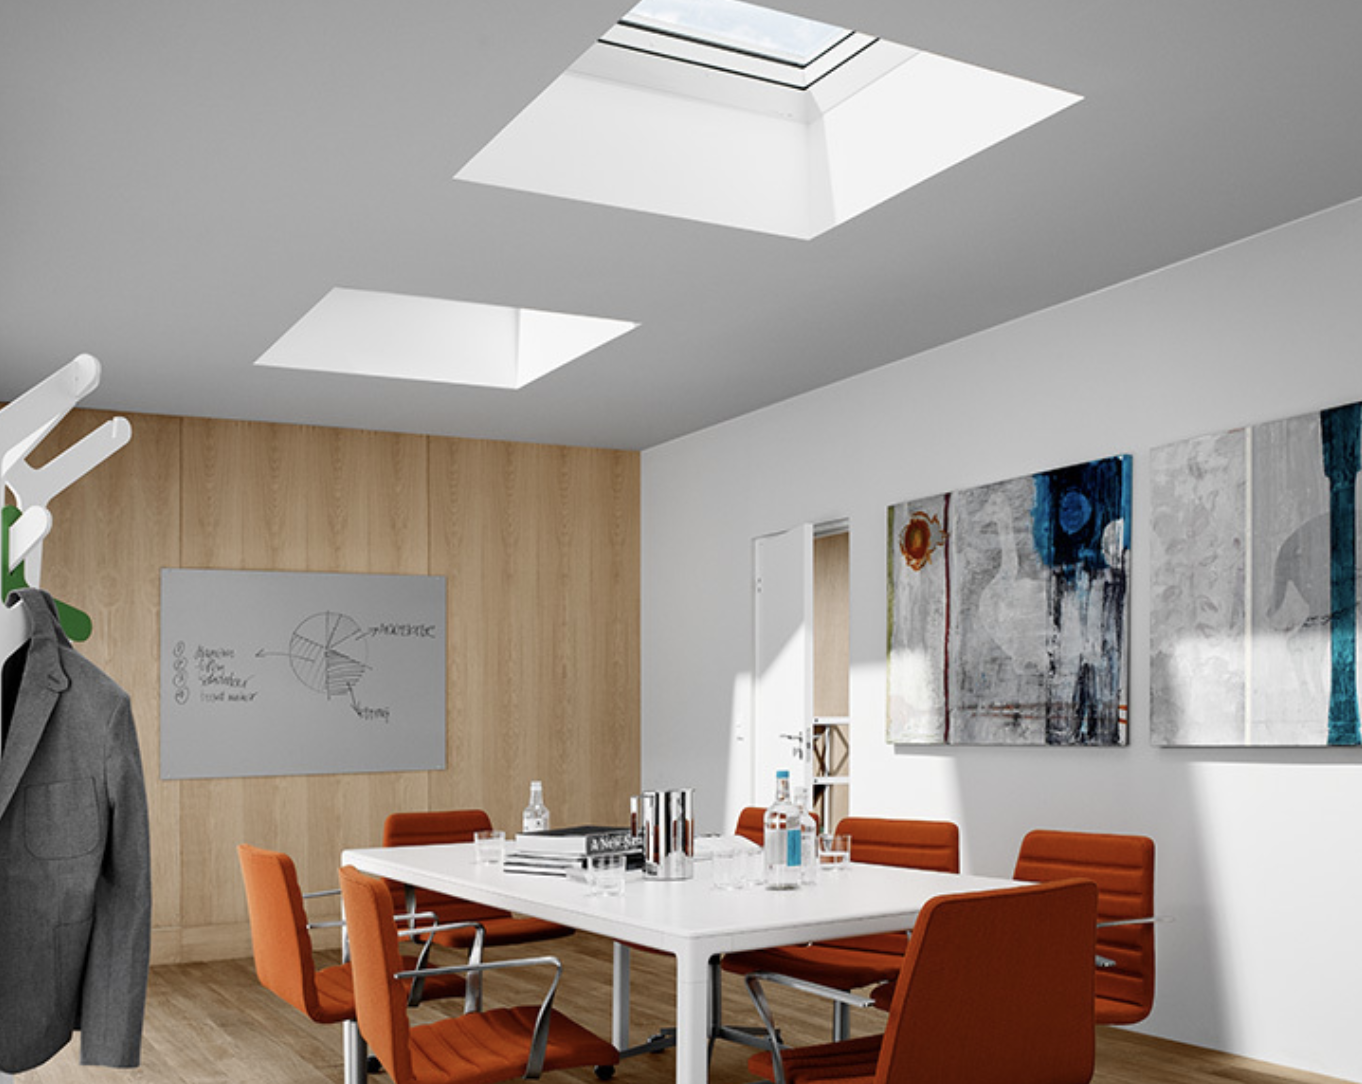 VELUX Commercial fixed skylights by Specialty Home Products. Specialty Home Products, Inc. Spokane (509)534-8372